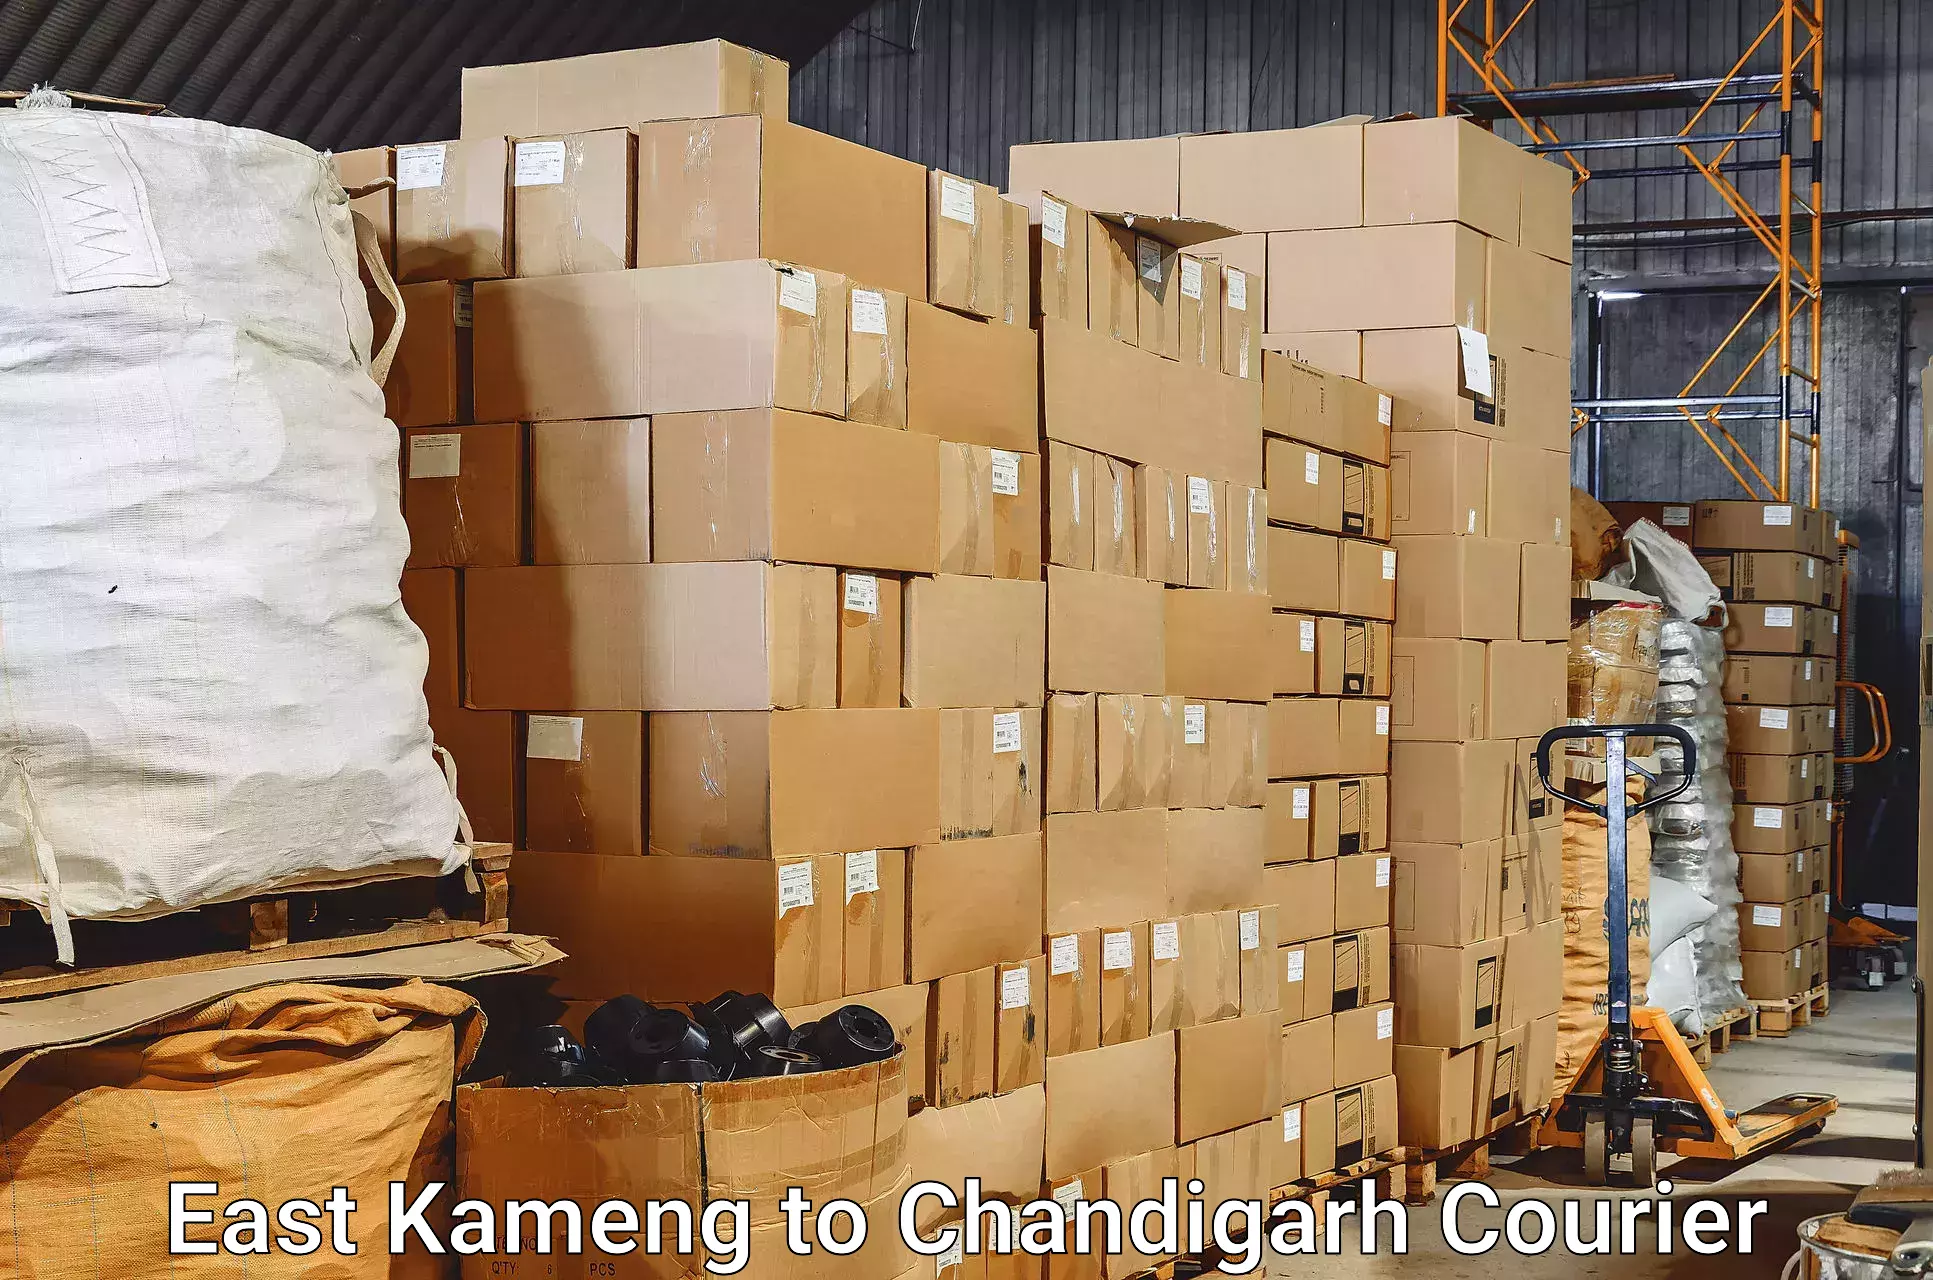 Baggage shipping experts East Kameng to Chandigarh